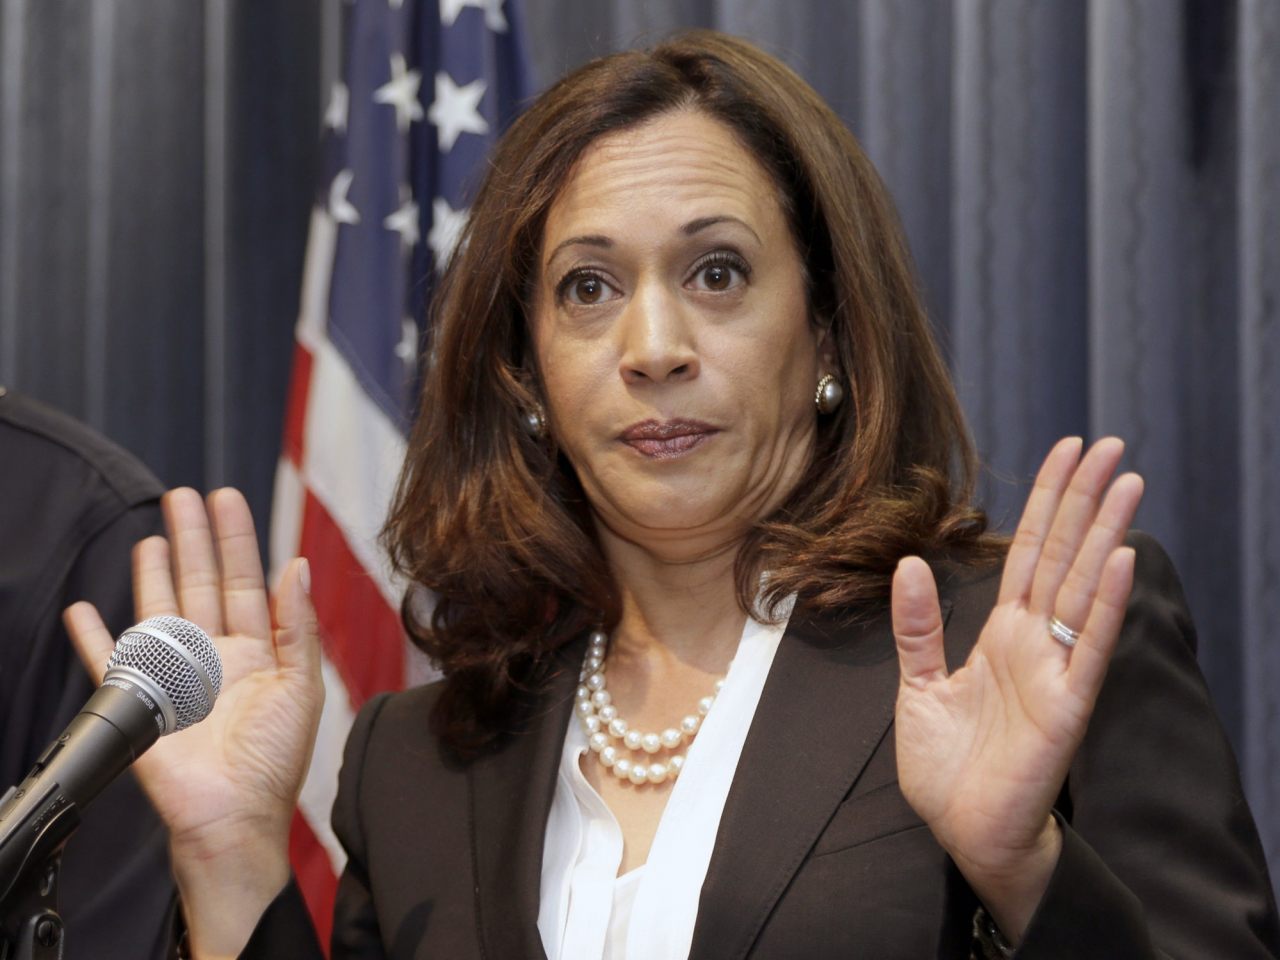 Kamala Harris put in charge of “Ministry of Gender Truth” to harass anyone who doesn’t bow down to LGBT insanity